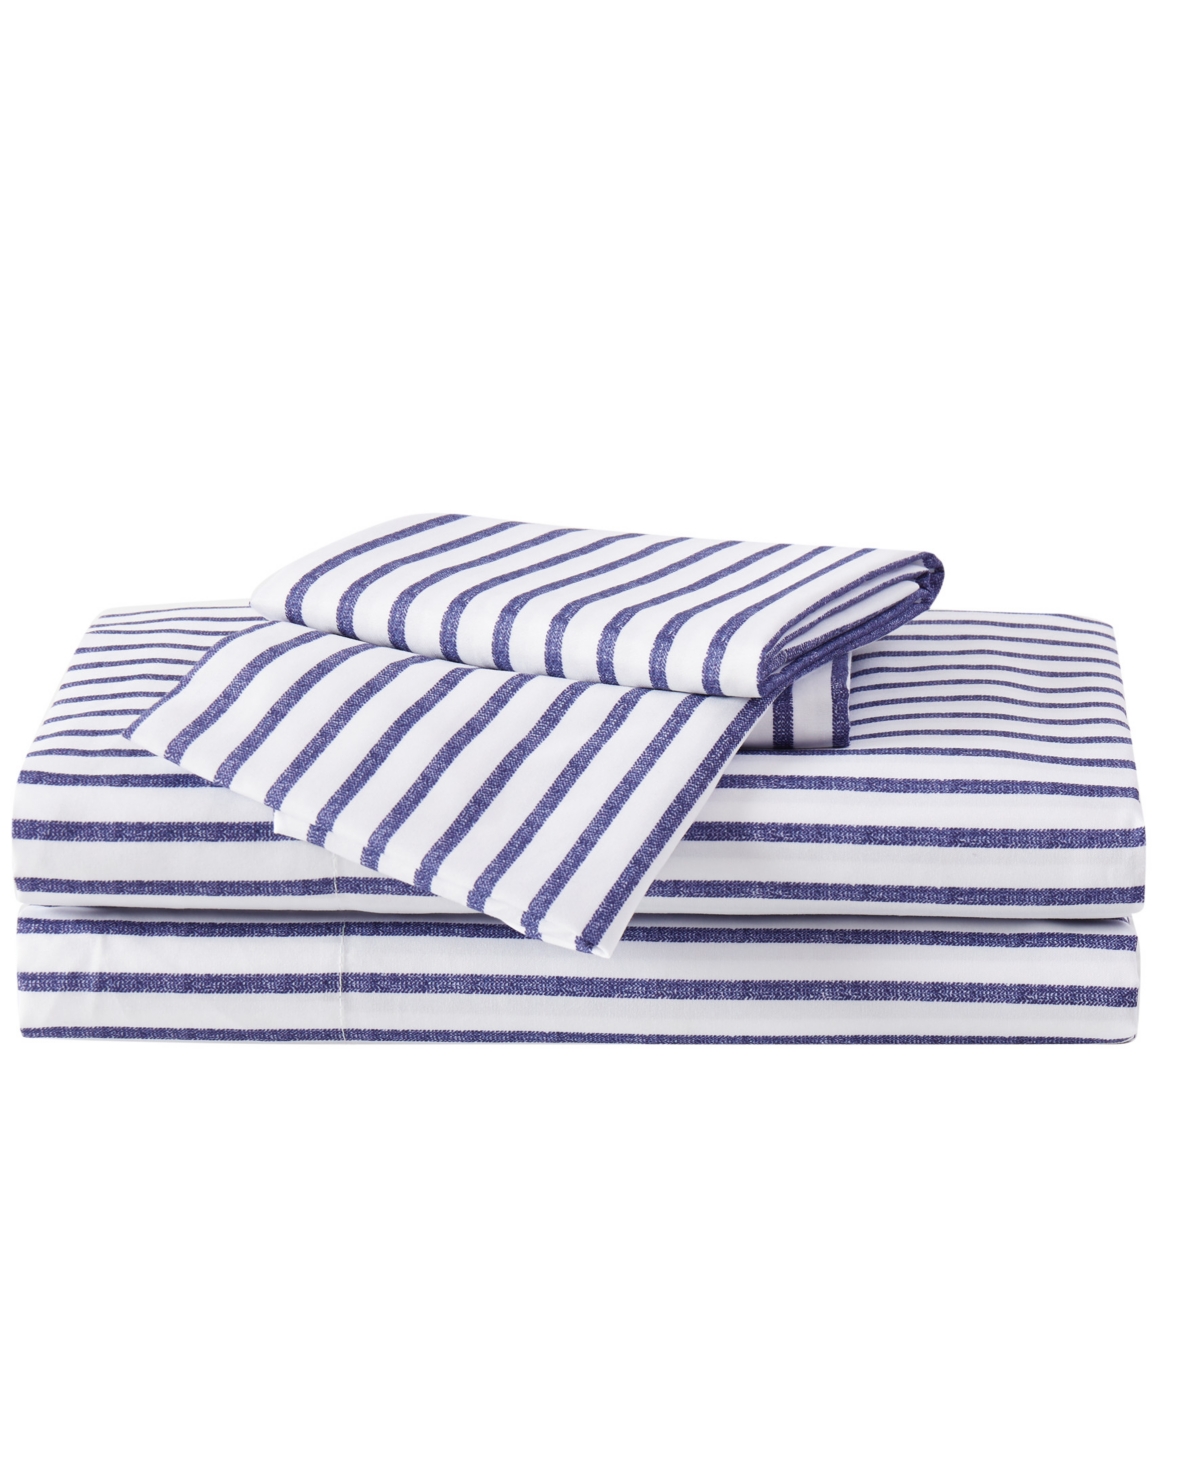 Truly Soft Twin 4 Pc Sheet Set In Pinstripe Navy,white